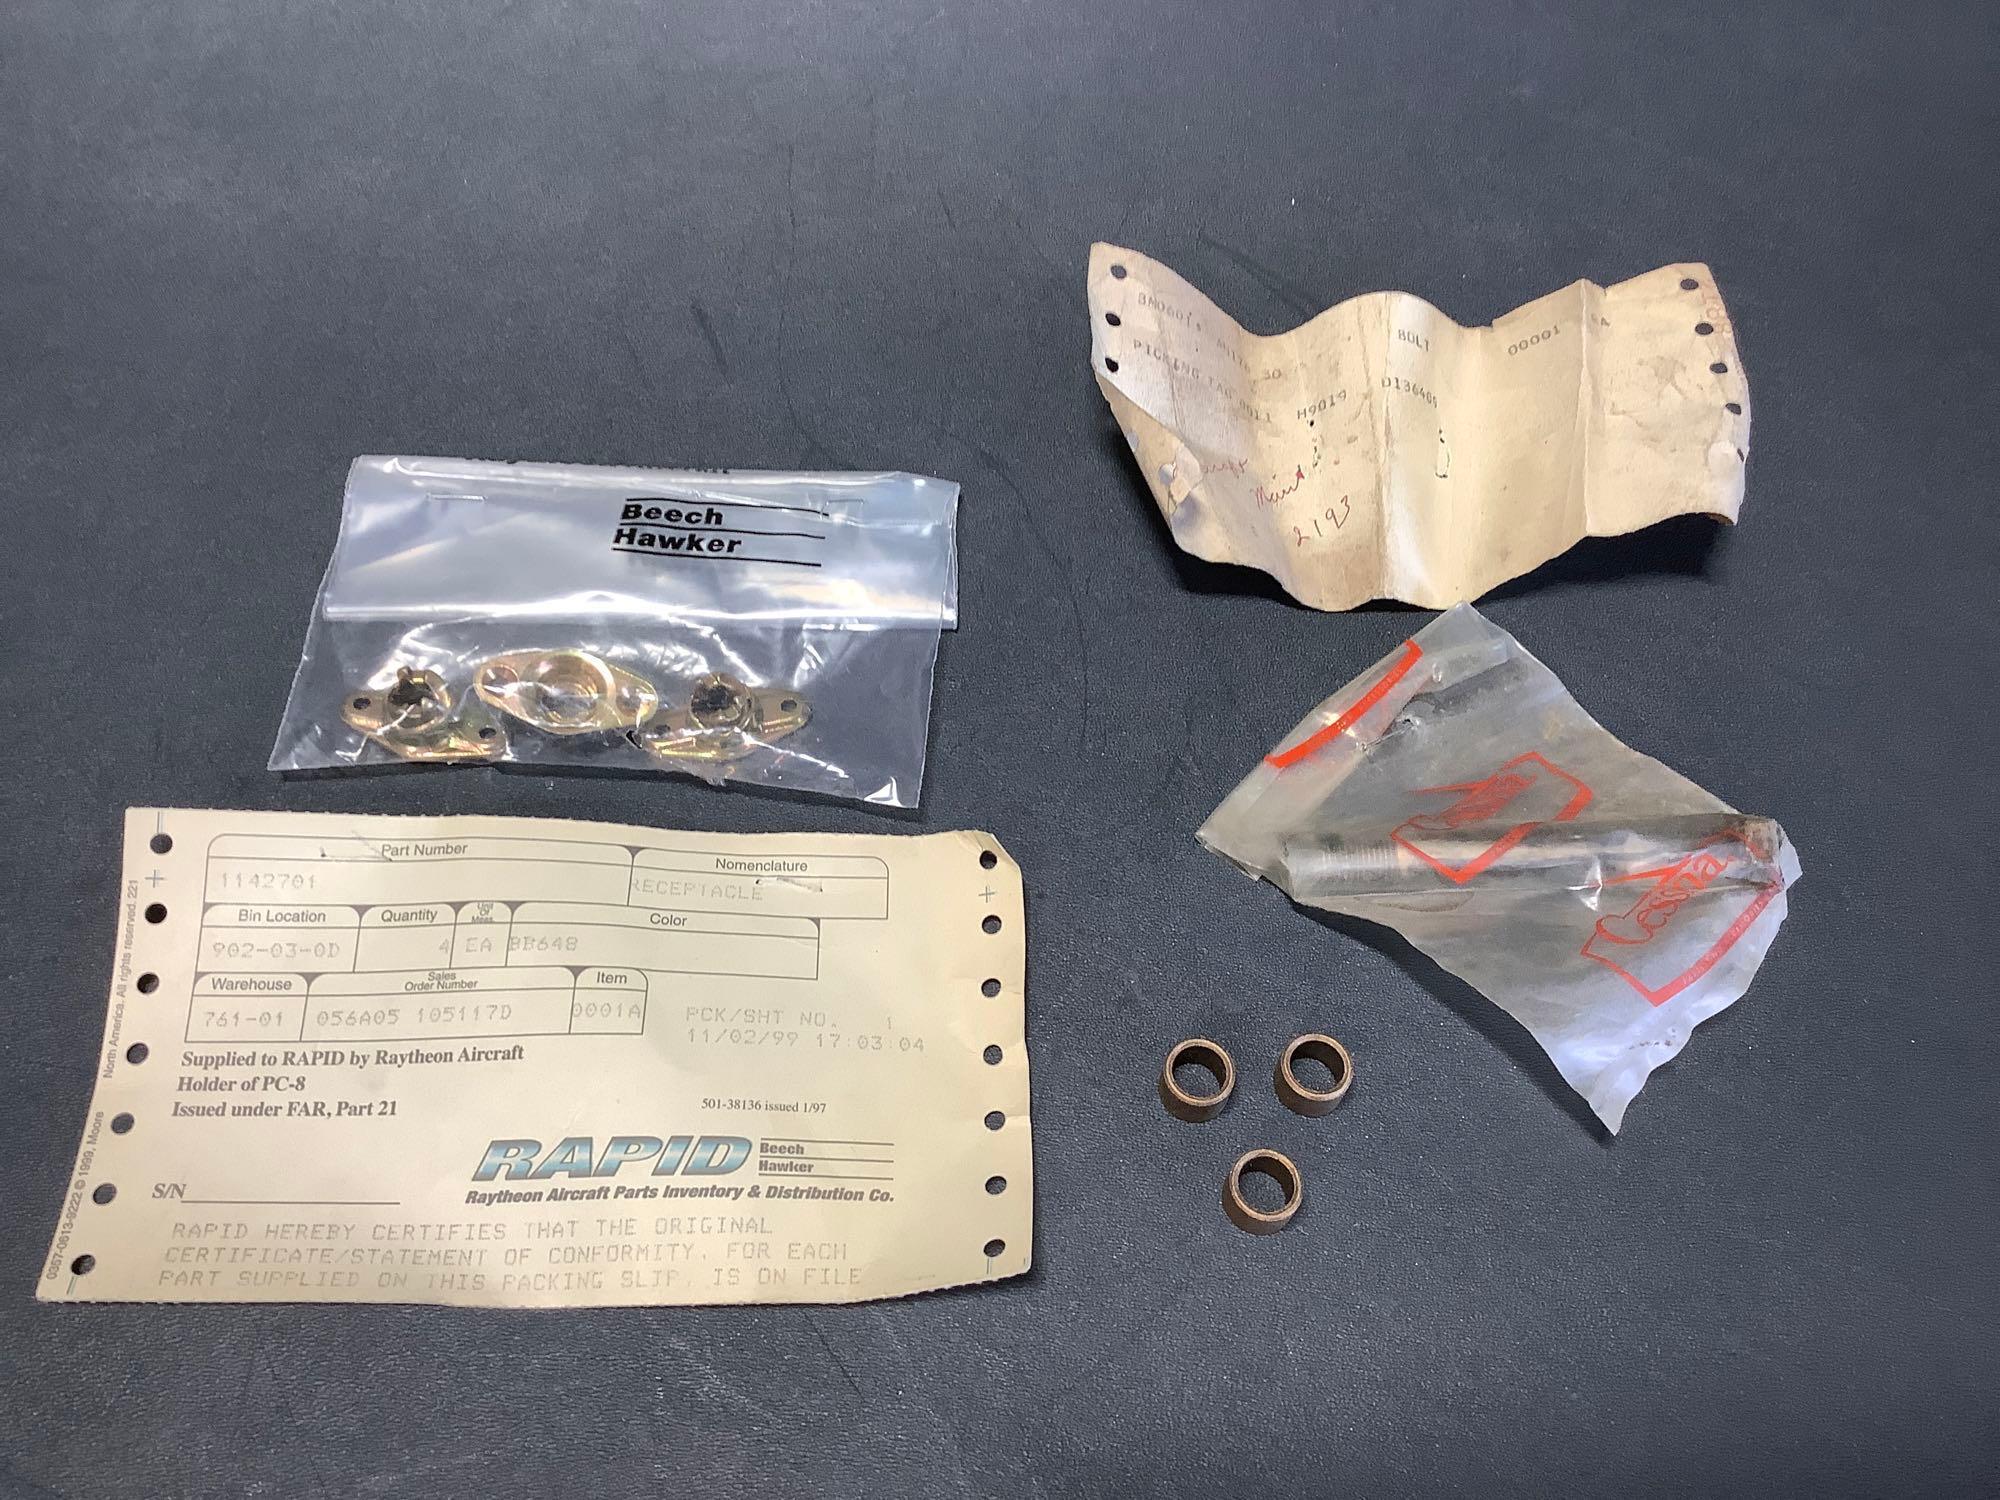 NEW CESSNA COWL FASTENERS, BEARINGS, BUSHINGS & EXPENDABLES S2319-7, MS20220-1, HSBG5S, 0422280,